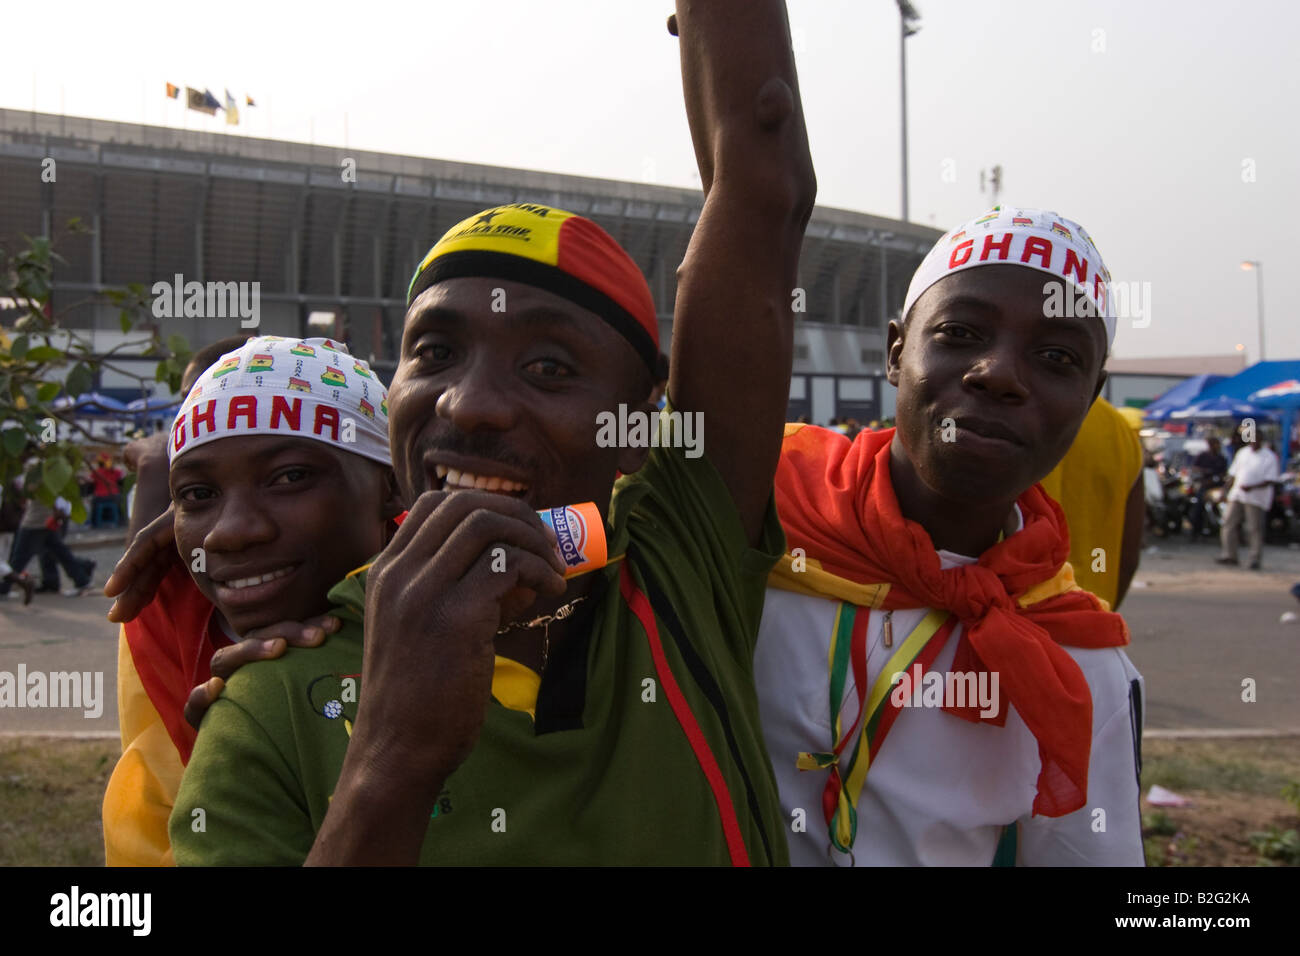 Football supporters outside Ohene Djan football stadium on opening day Africa Cup of Nations Ghana 2008 Stock Photo